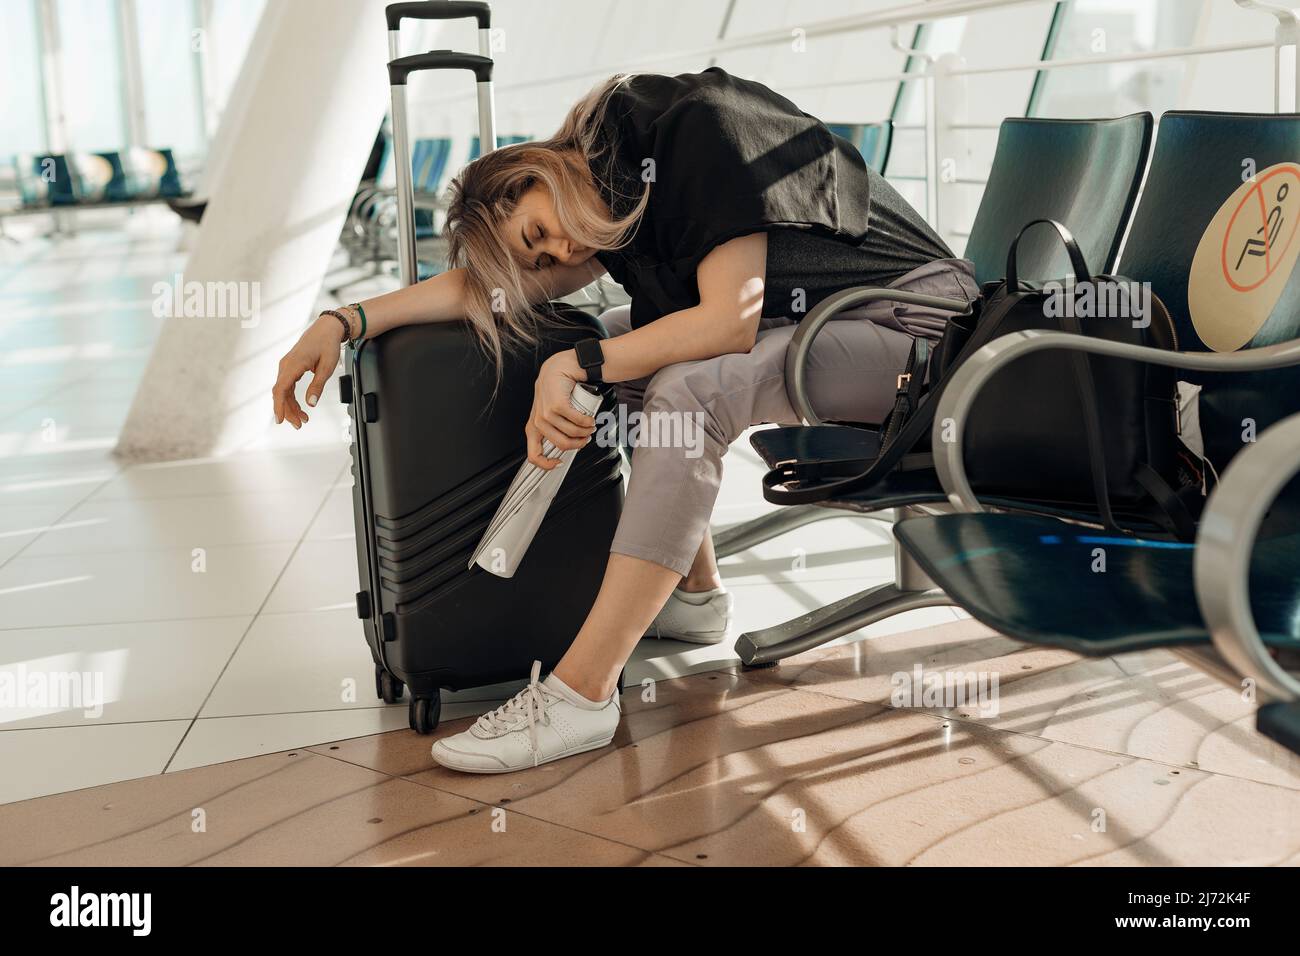 Tired and sleepy blond woman in casual clothes with luggage, leaning on bags, sitting in airport terminal. Cancel flight Stock Photo